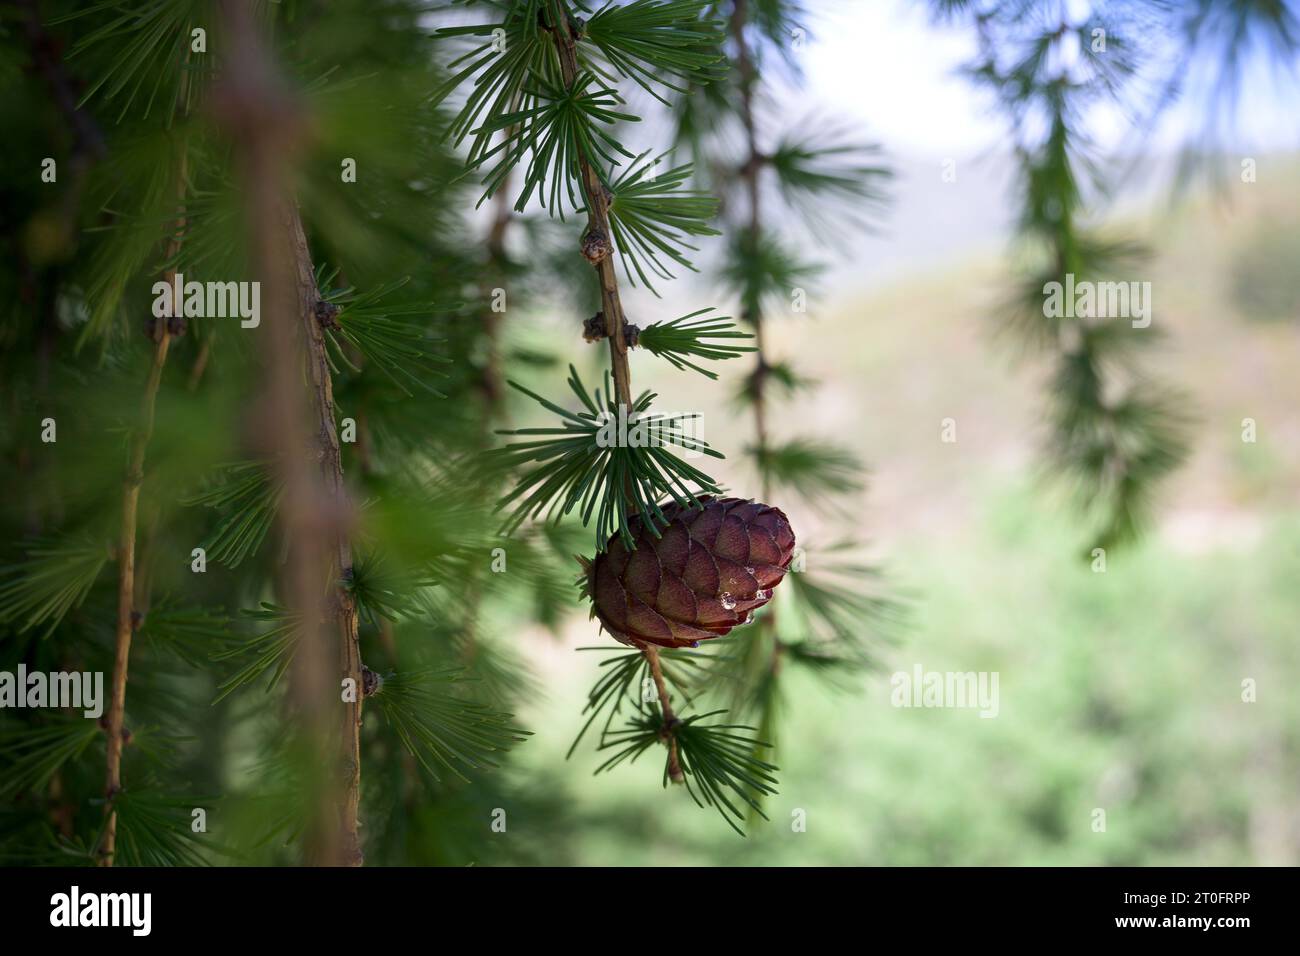 Pine cone in resinous pine tree with drops of isolated resin in the tree horizontal Stock Photo